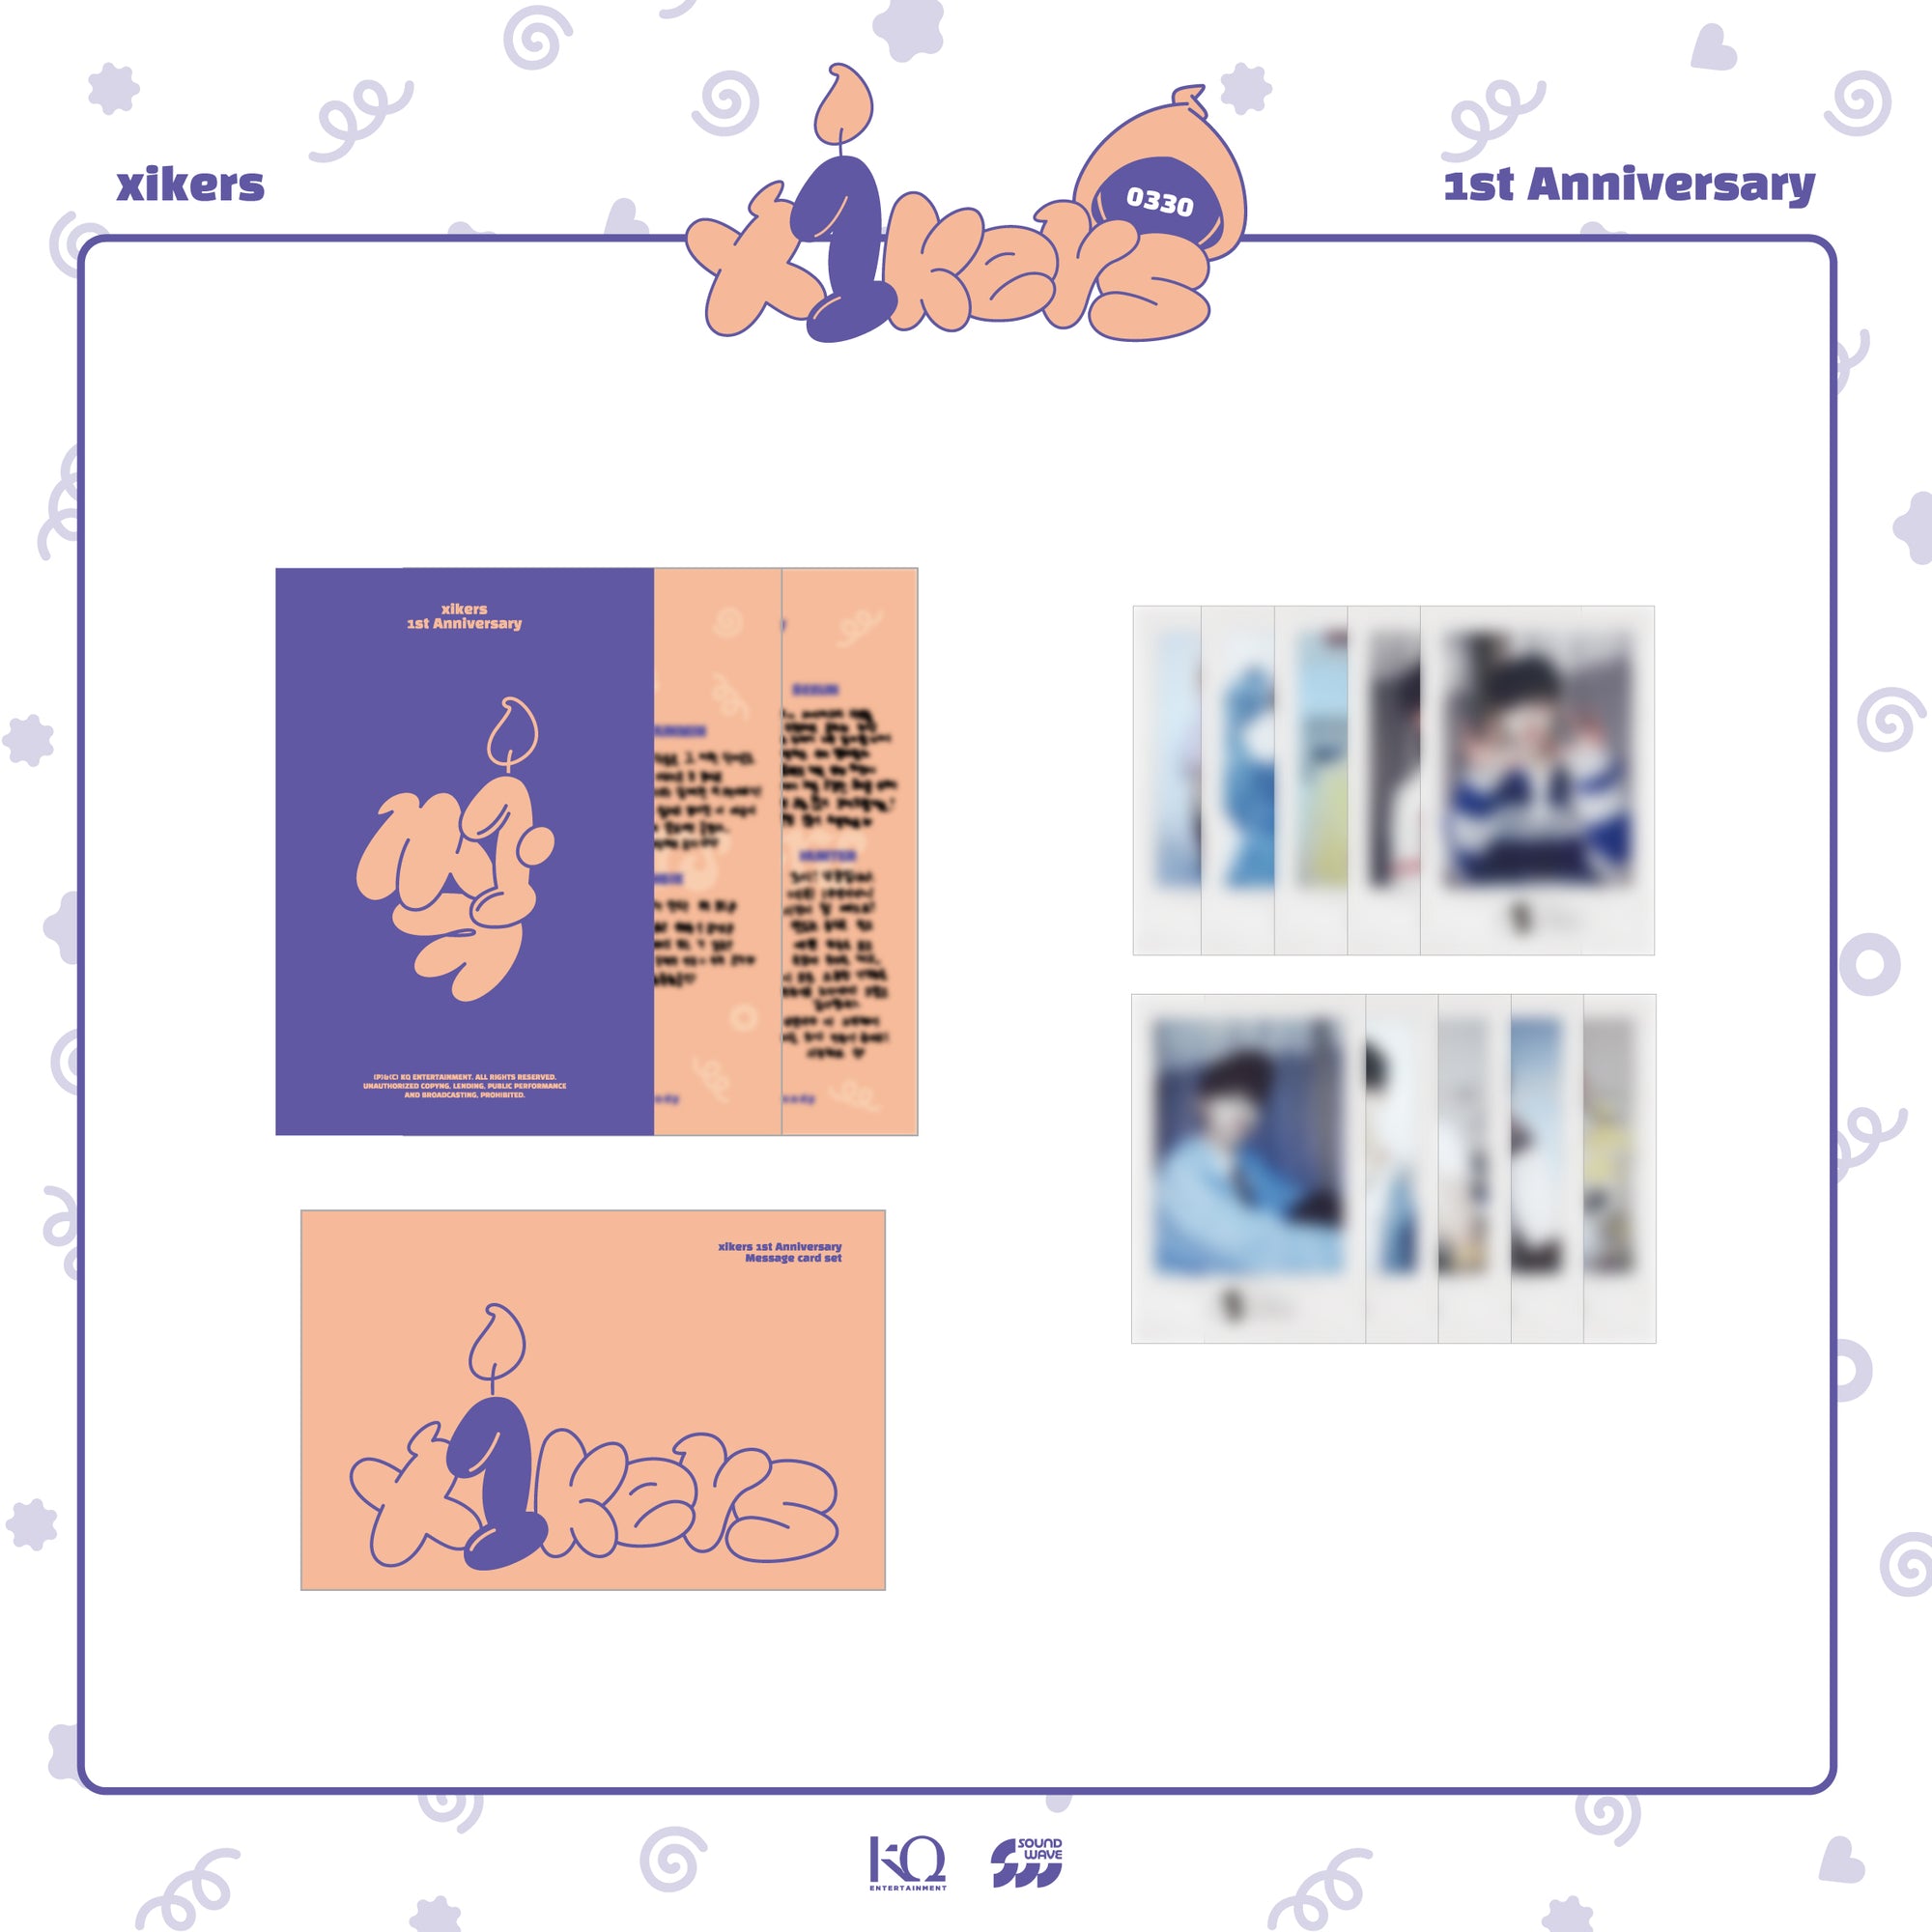 XIKERS - 'x1kers' 1ST ANNIVERSARY OFFICIAL MD x1kers MESSAGE CARD SET